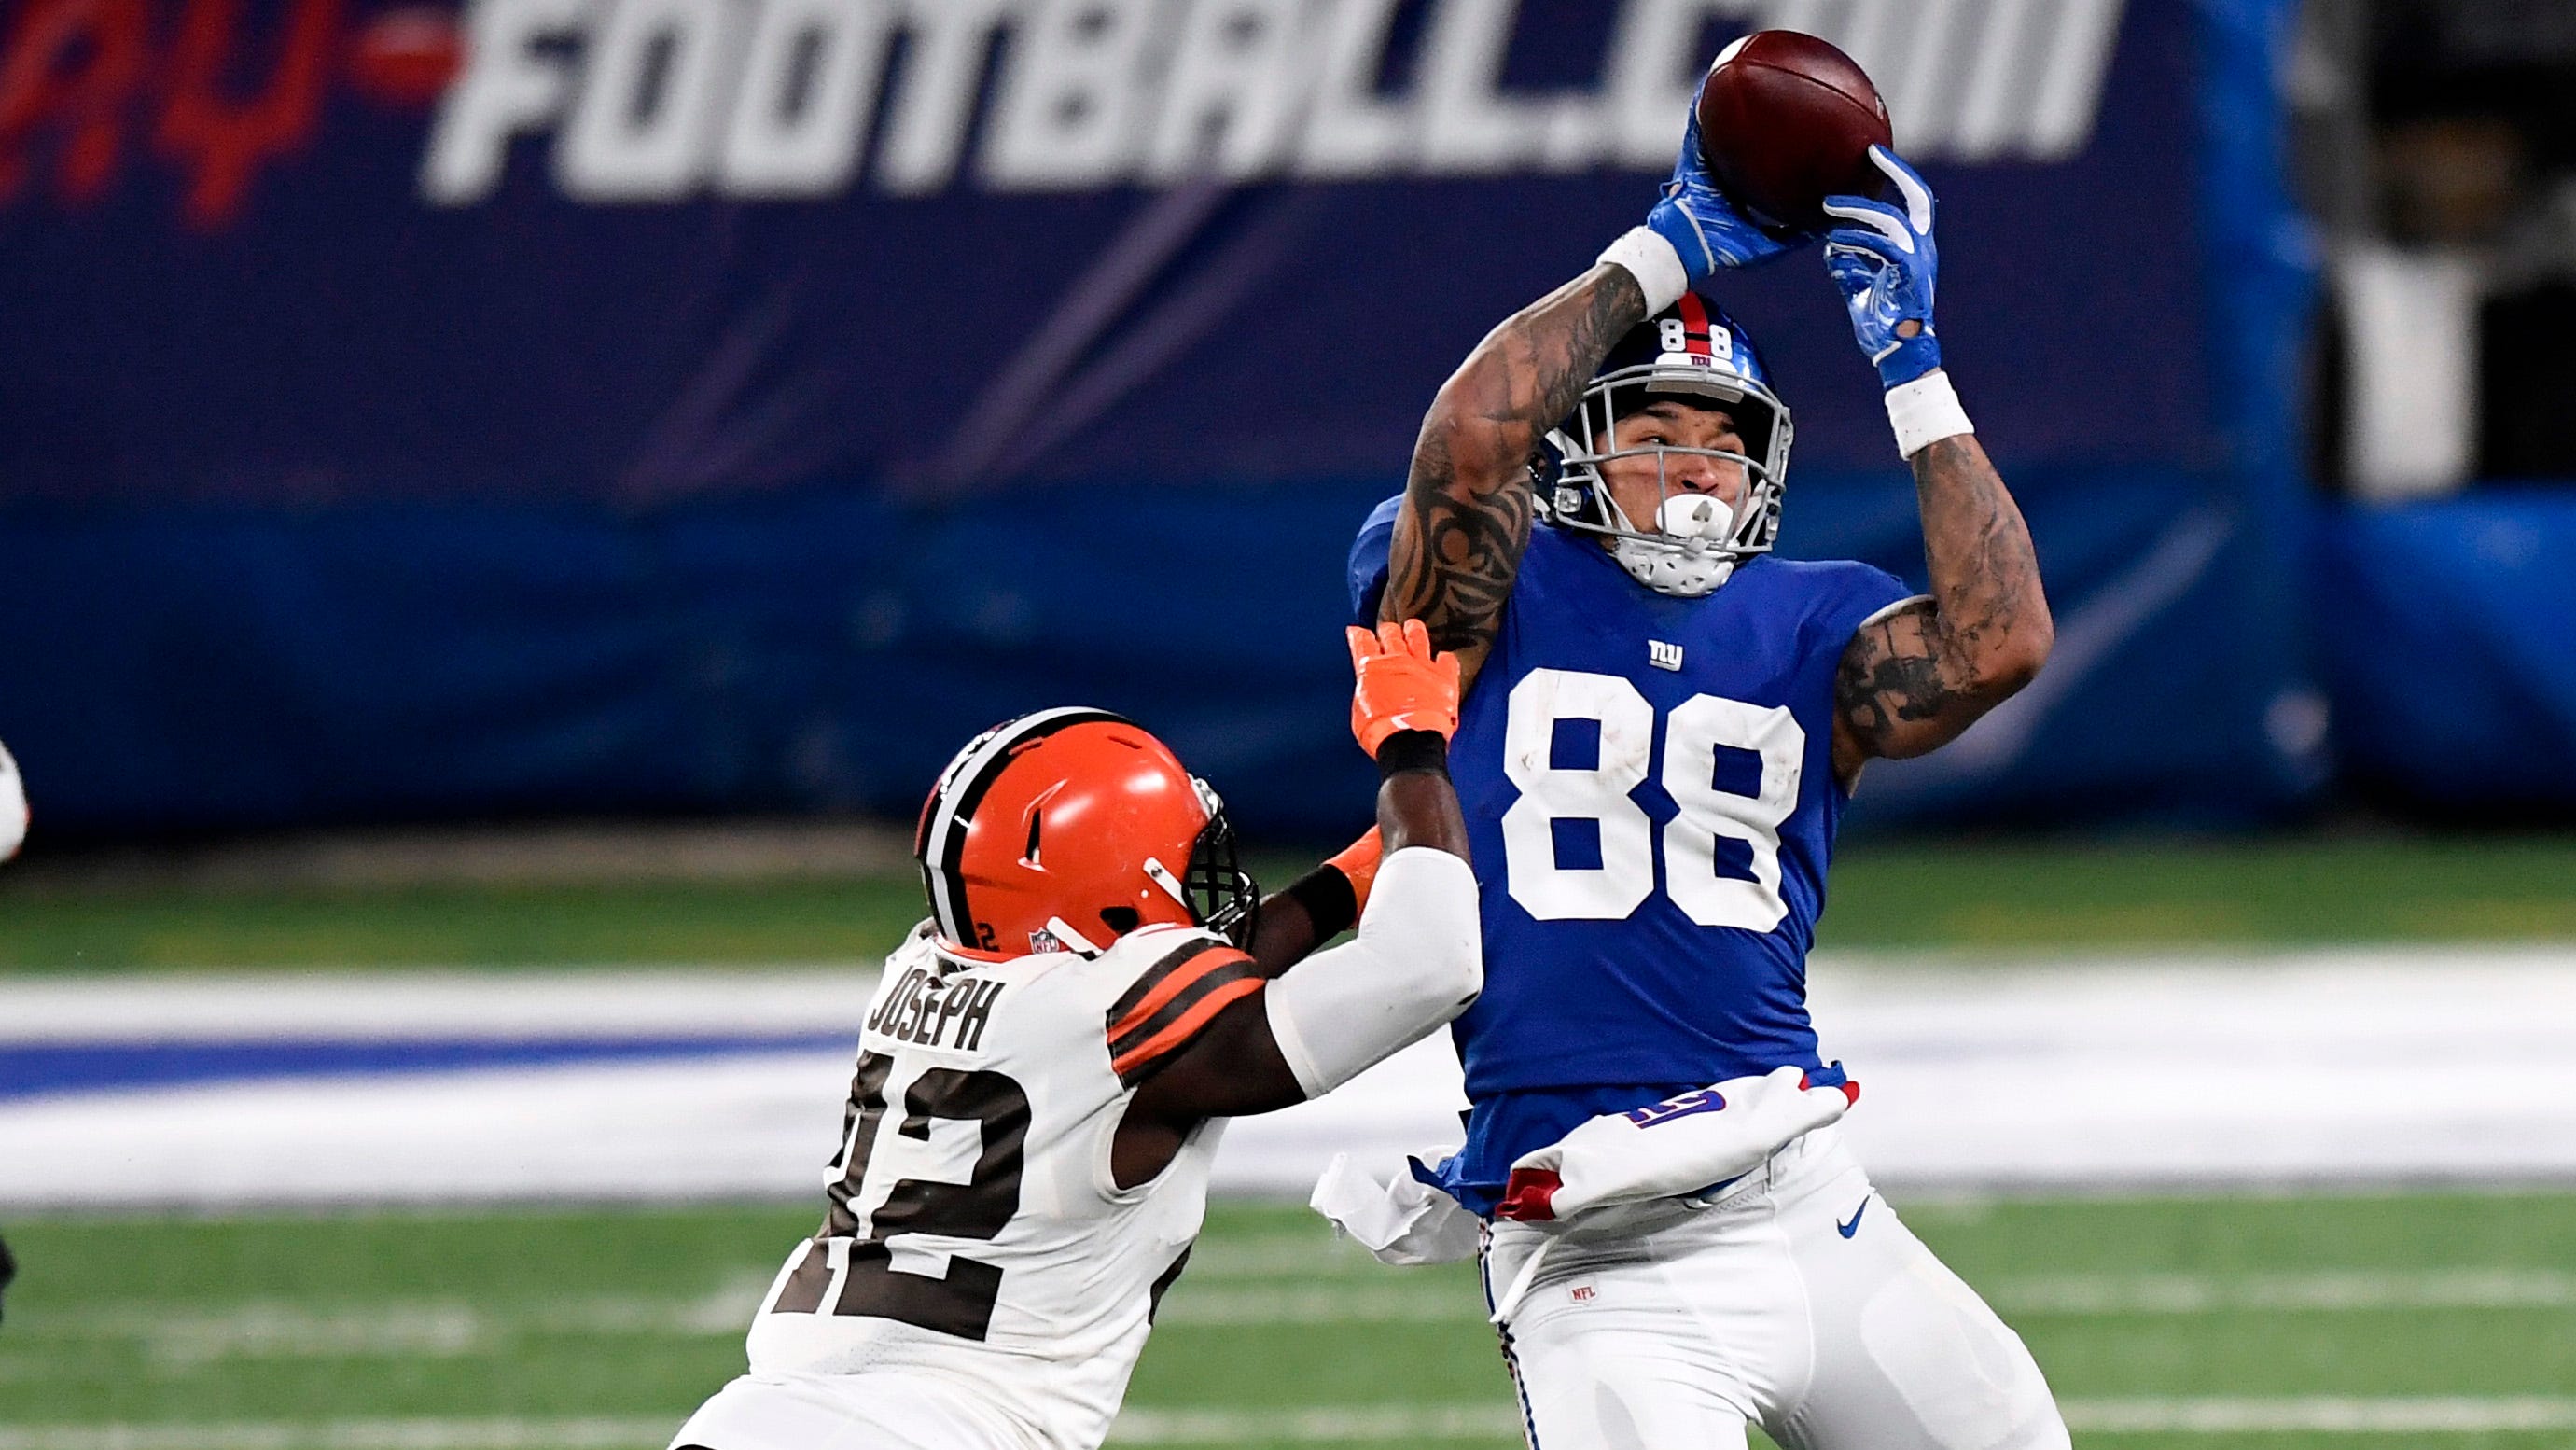 NY Giants Evan Engram, James Bradberry are firsttime Pro Bowlers